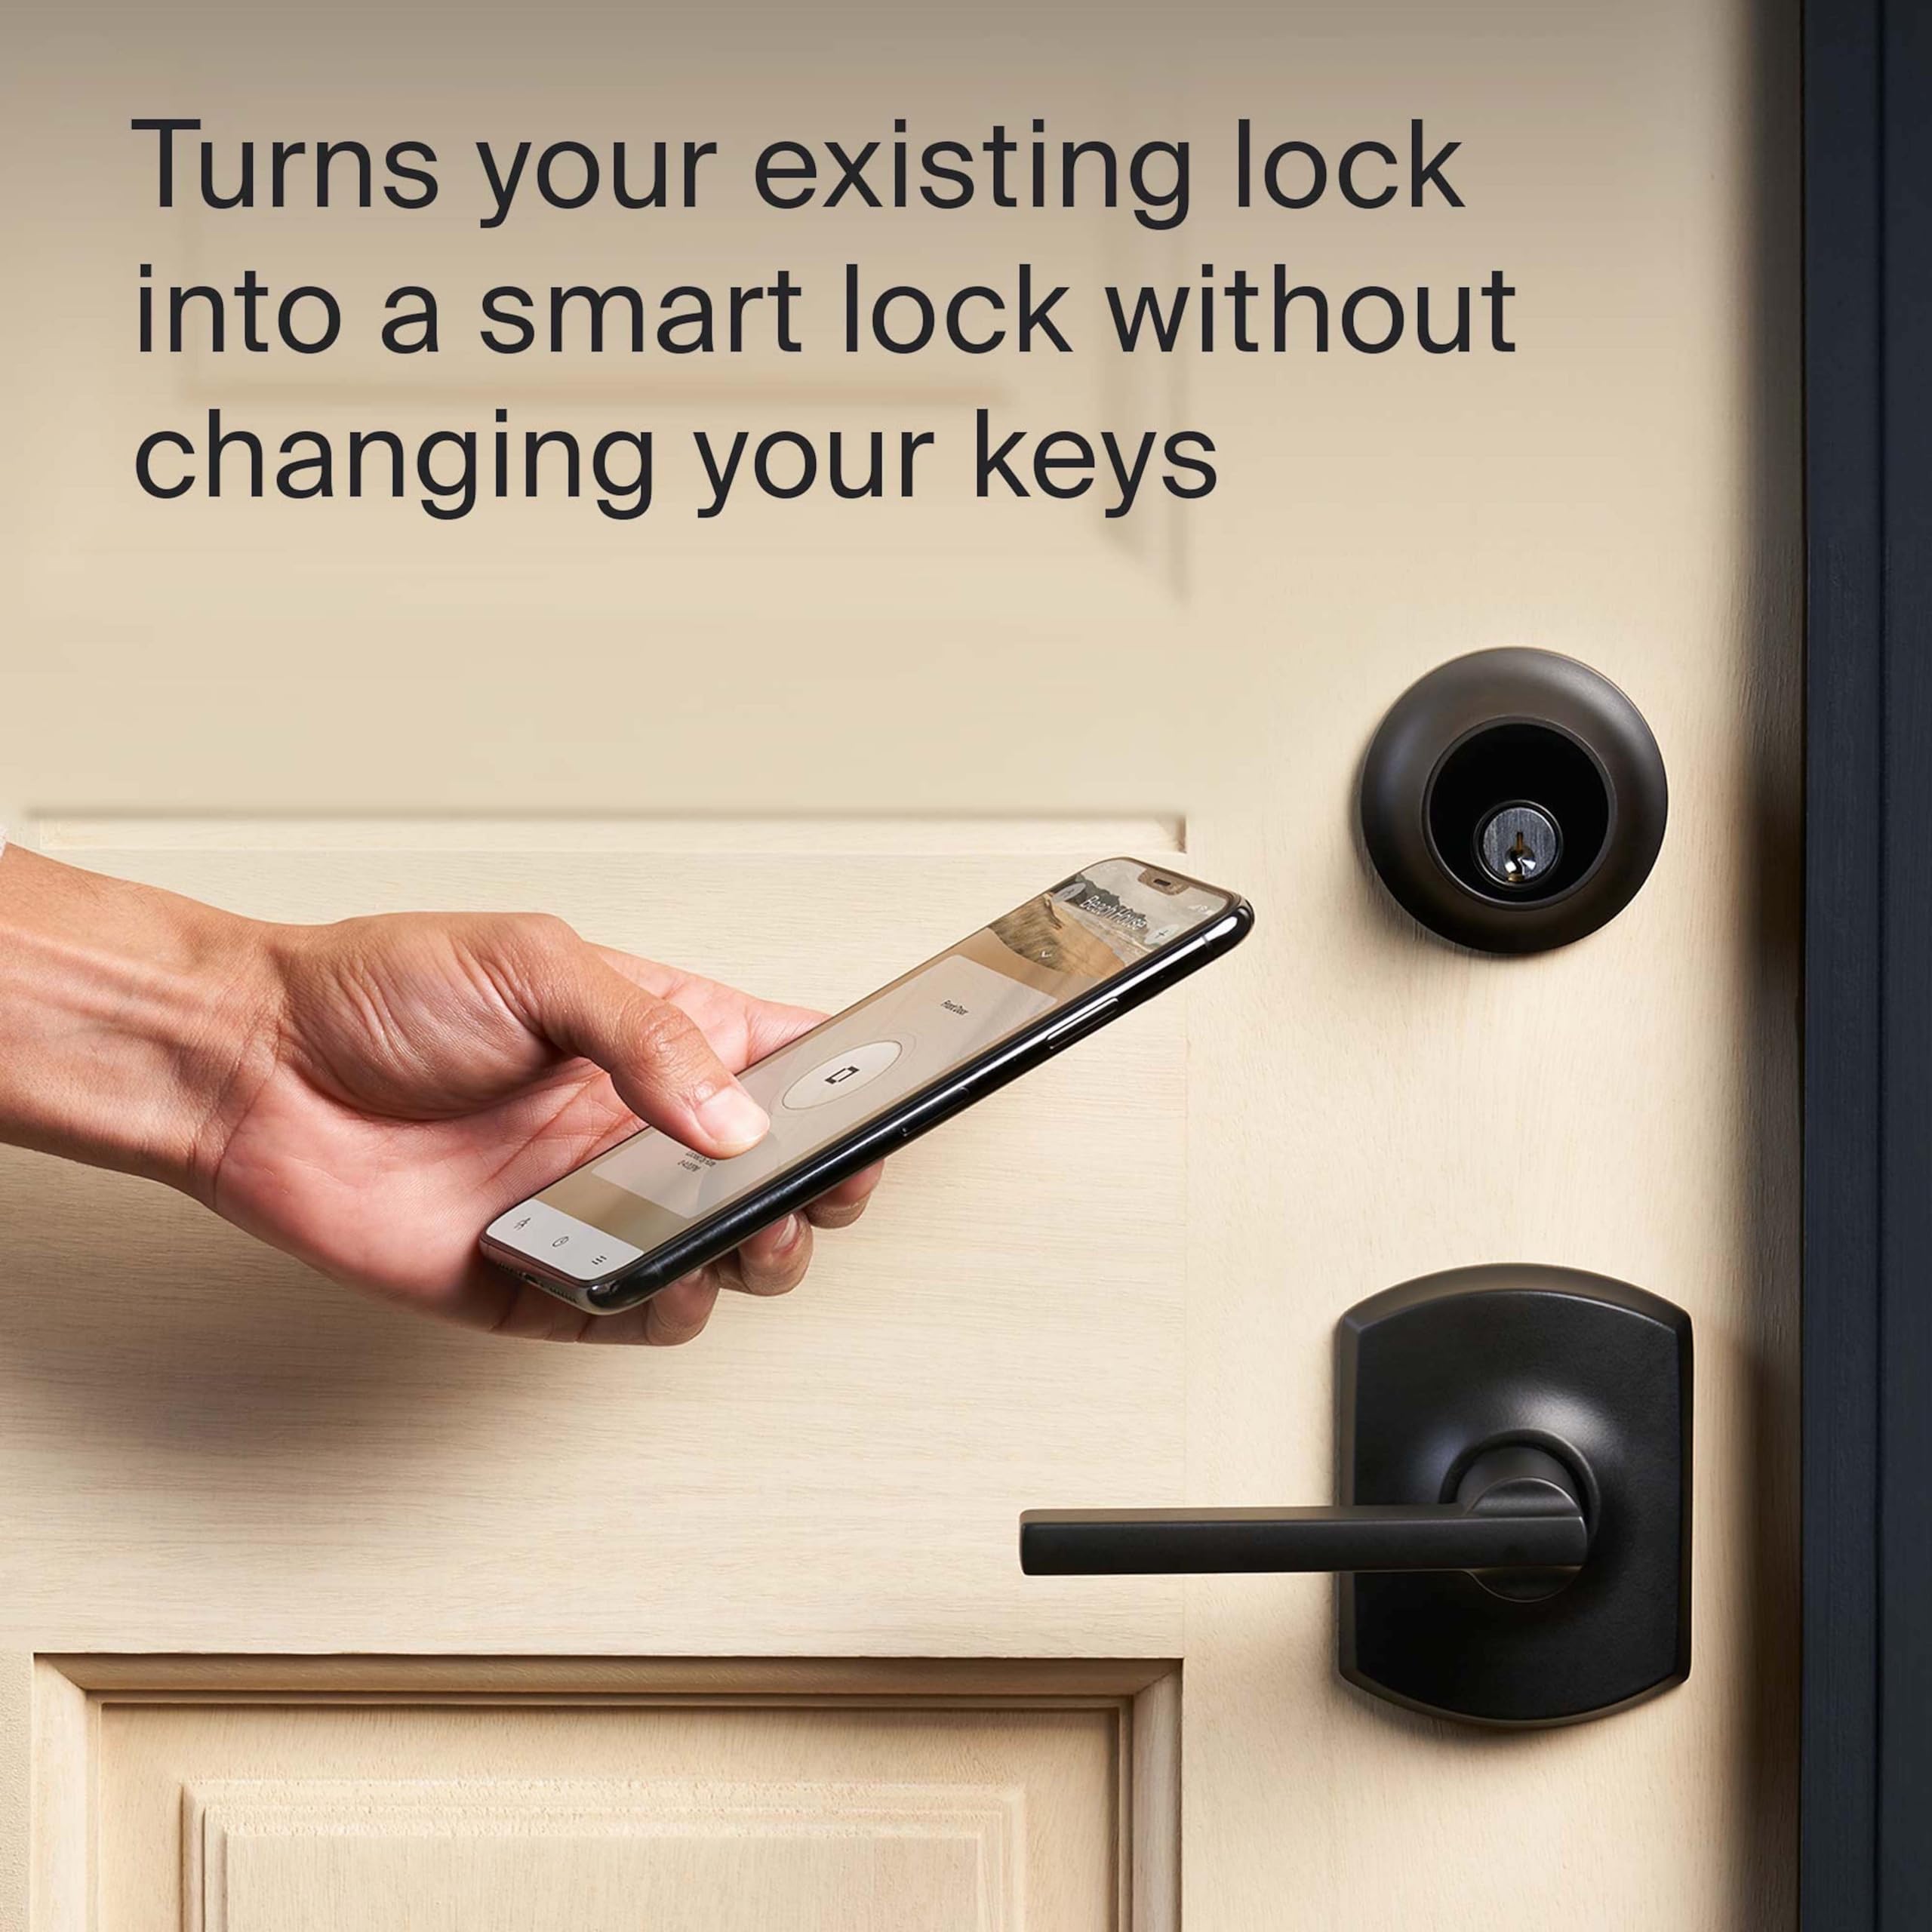 Level Bolt Connect WiFi Smart Deadbolt Lock - Convert Your Existing Door Lock Into a Smart Lock, Remotely Control from Anywhere - Works with iOS, Android, Apple HomeKit, Amazon Alexa, Google Home